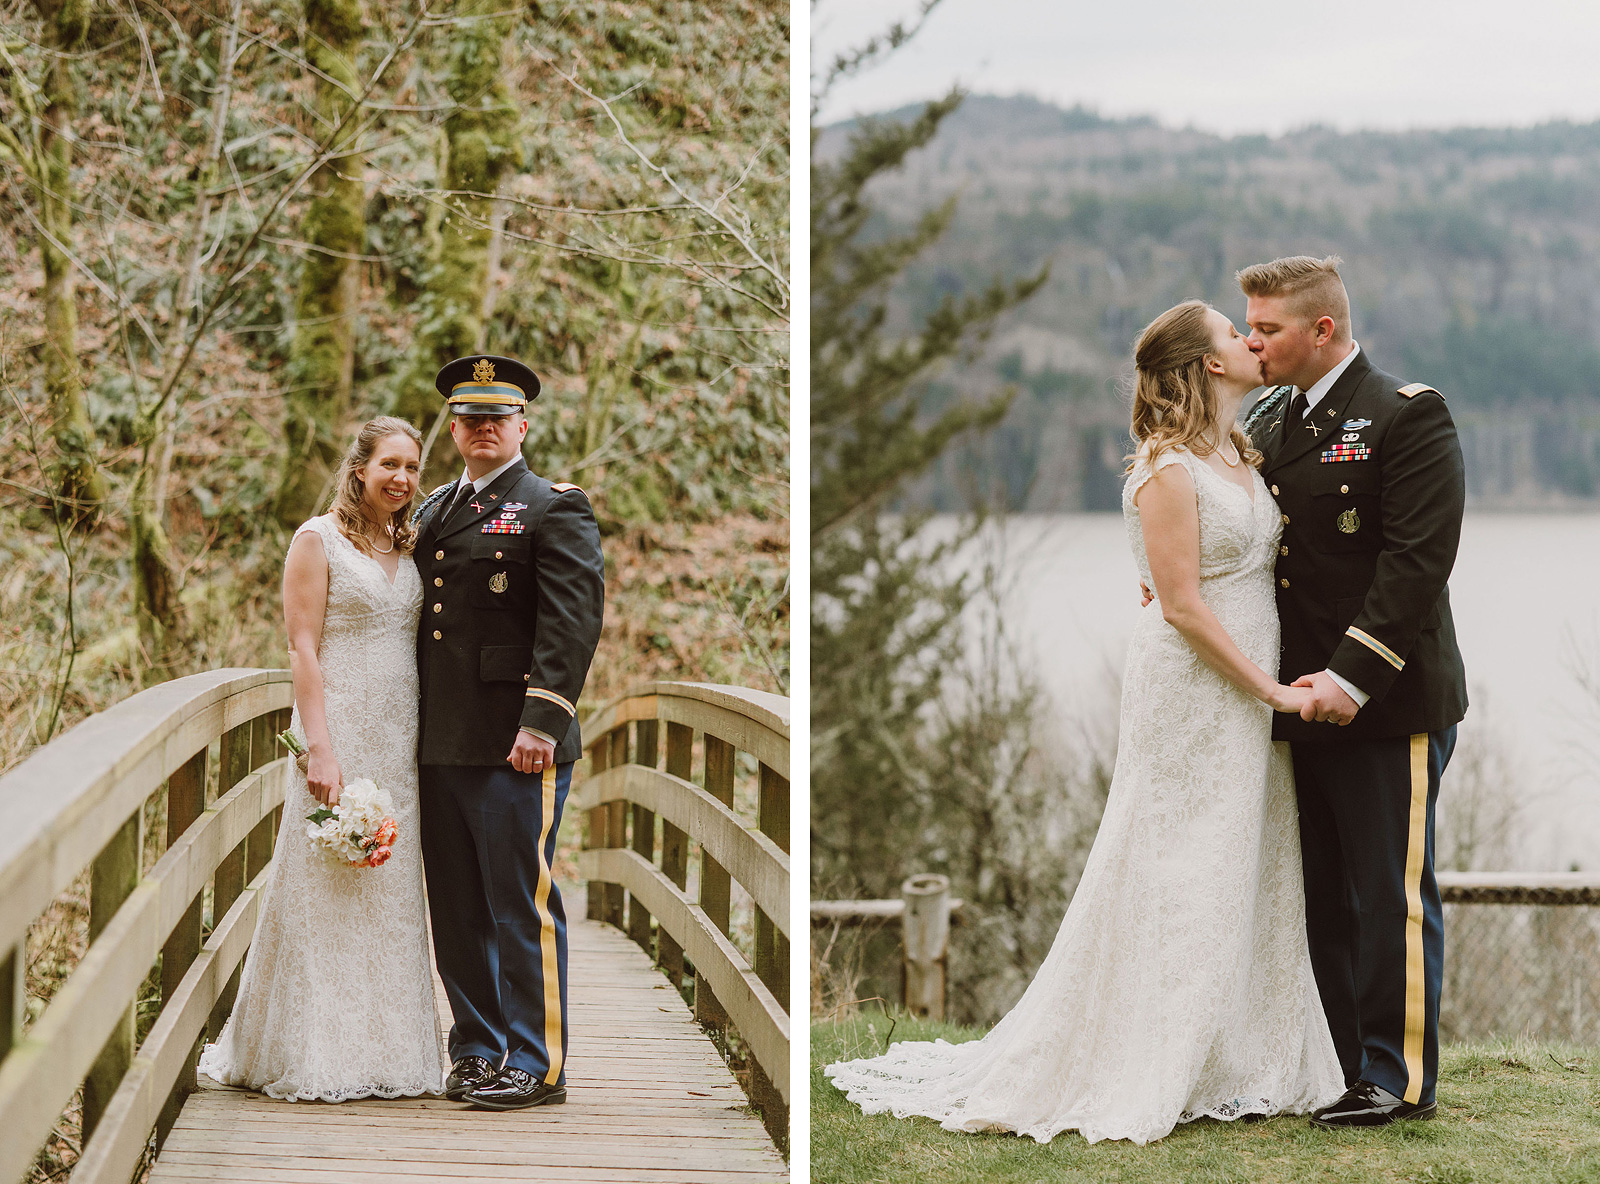 Portraits of Bride and Groom on the hiking trail | Bridal Veil Elopement Photographer